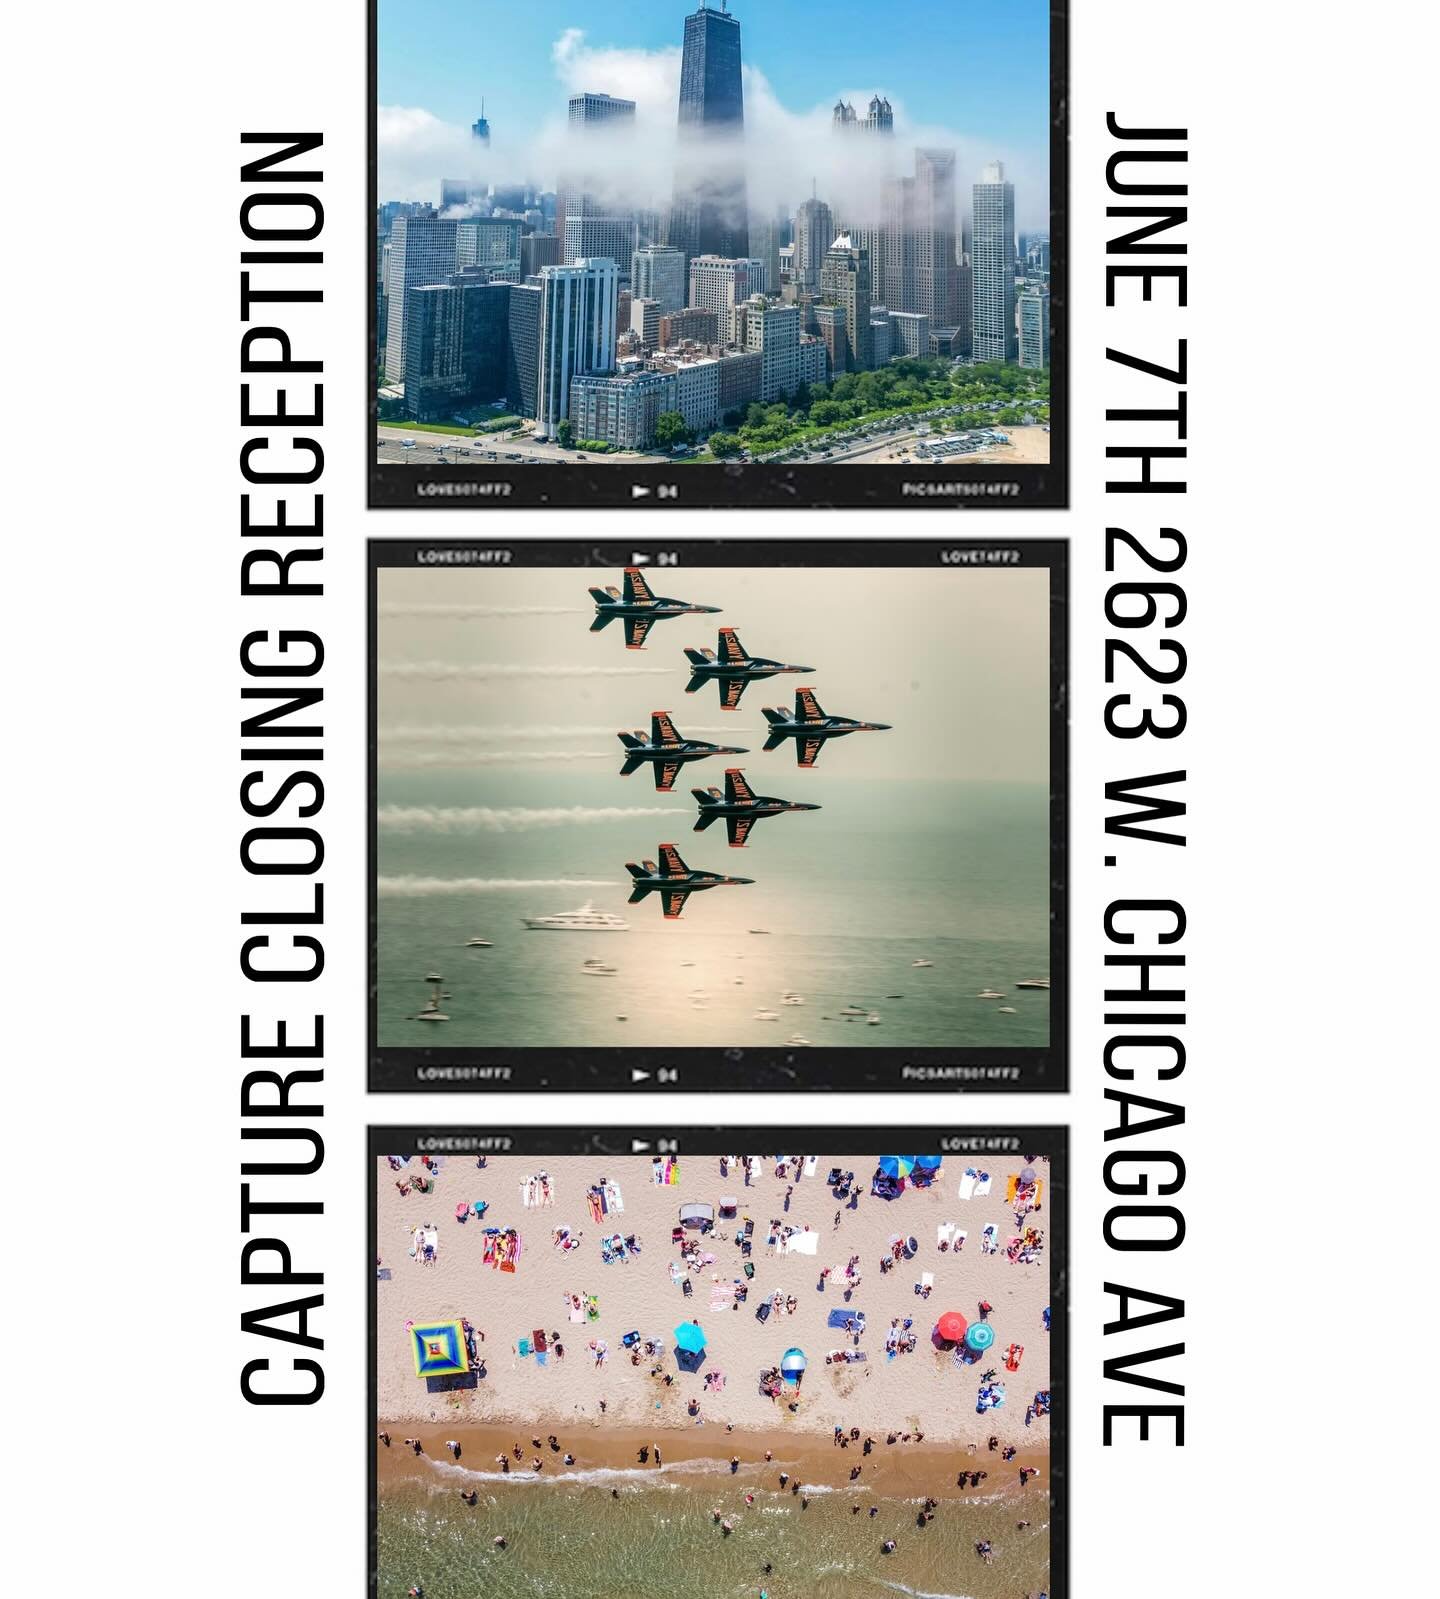 Did you miss the opening for CAPTURE? Come to our closing reception on June 7th 📷

Come see the photographic work of some Chicago Artists on Friday, June 7th from 5 to 8 PM! You&rsquo;ll have a chance to meet the artists and see the show before our 